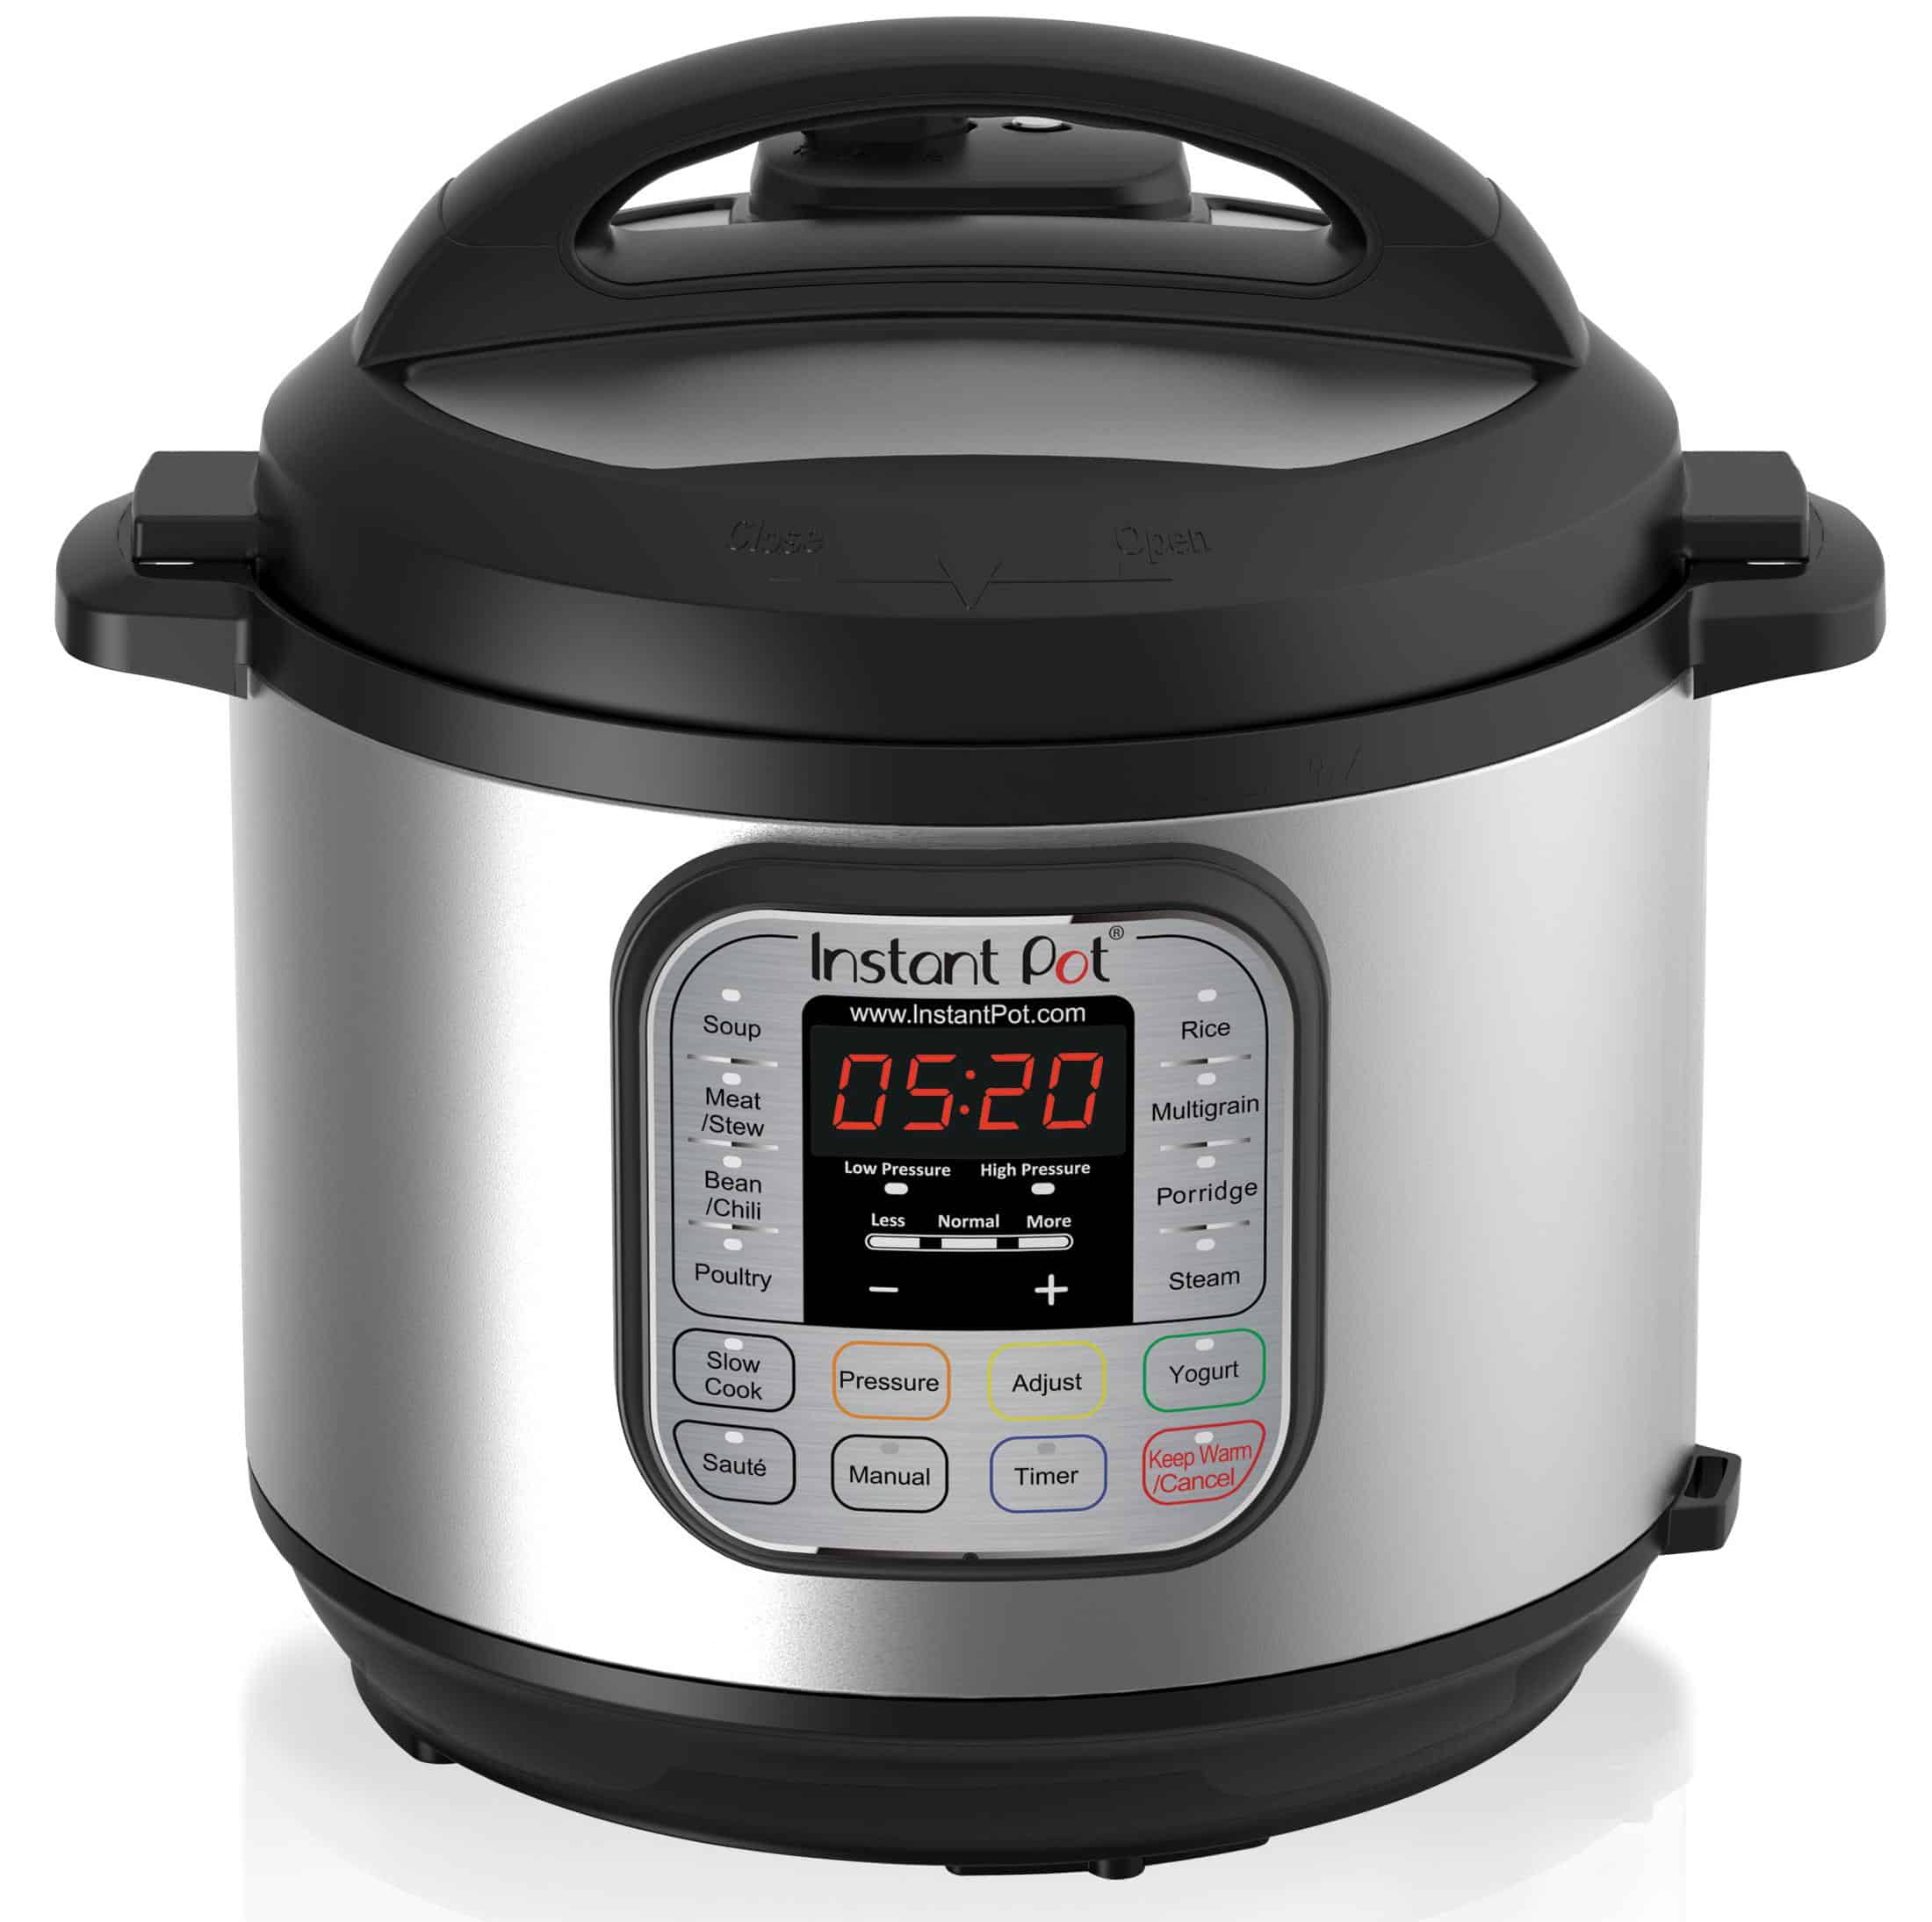 Instant Pot Pressure Cooker Review – Do you really need one?